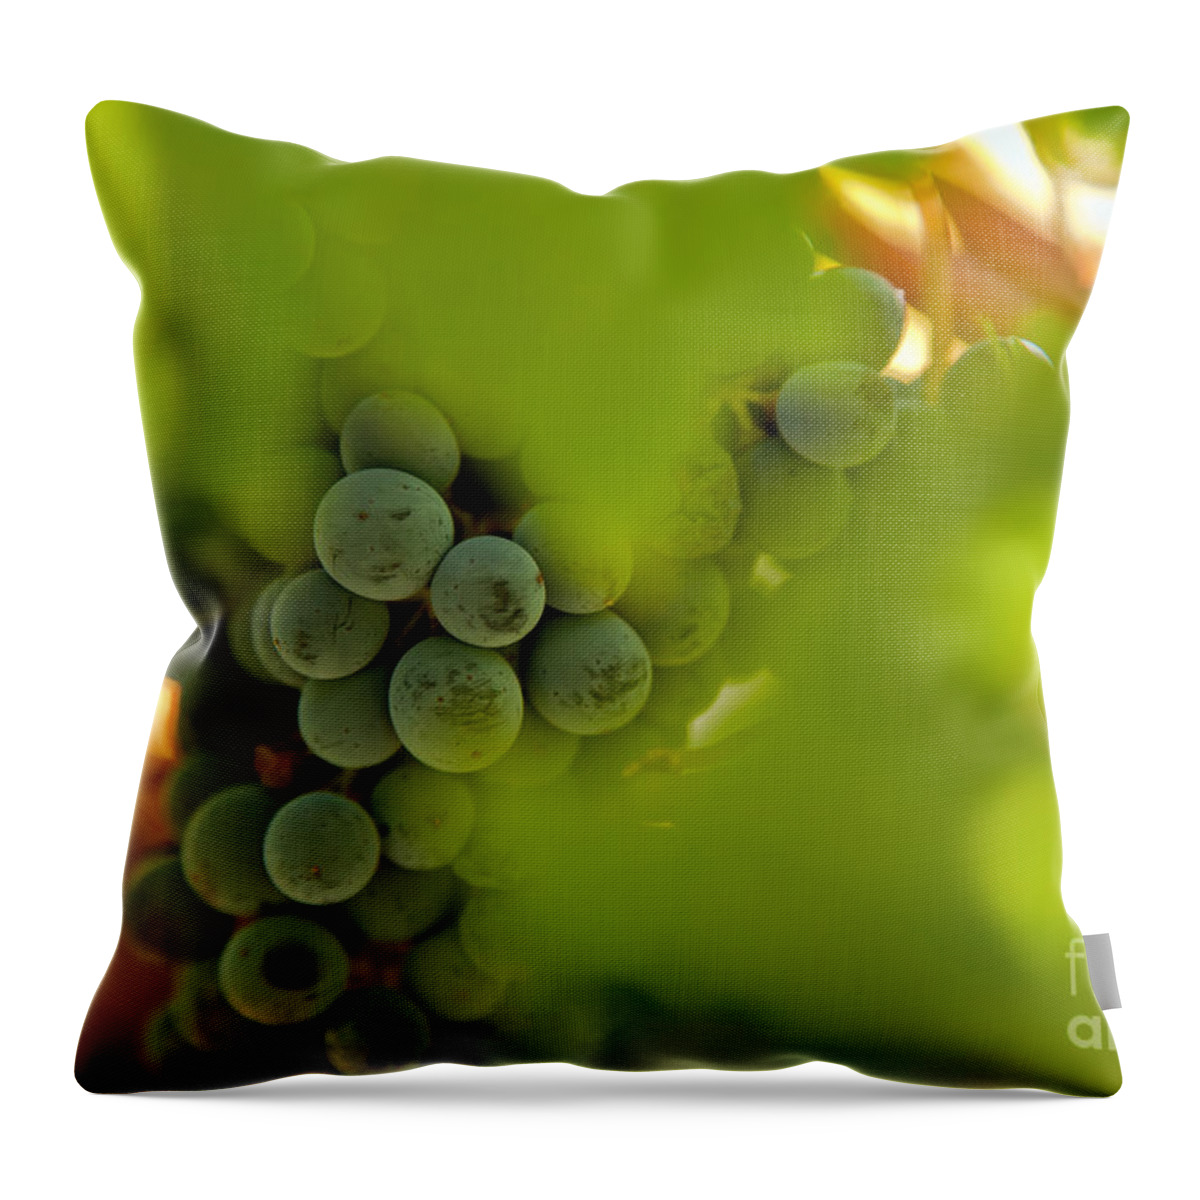 Abstract Throw Pillow featuring the photograph Harvest Season 2 by Jonathan Nguyen